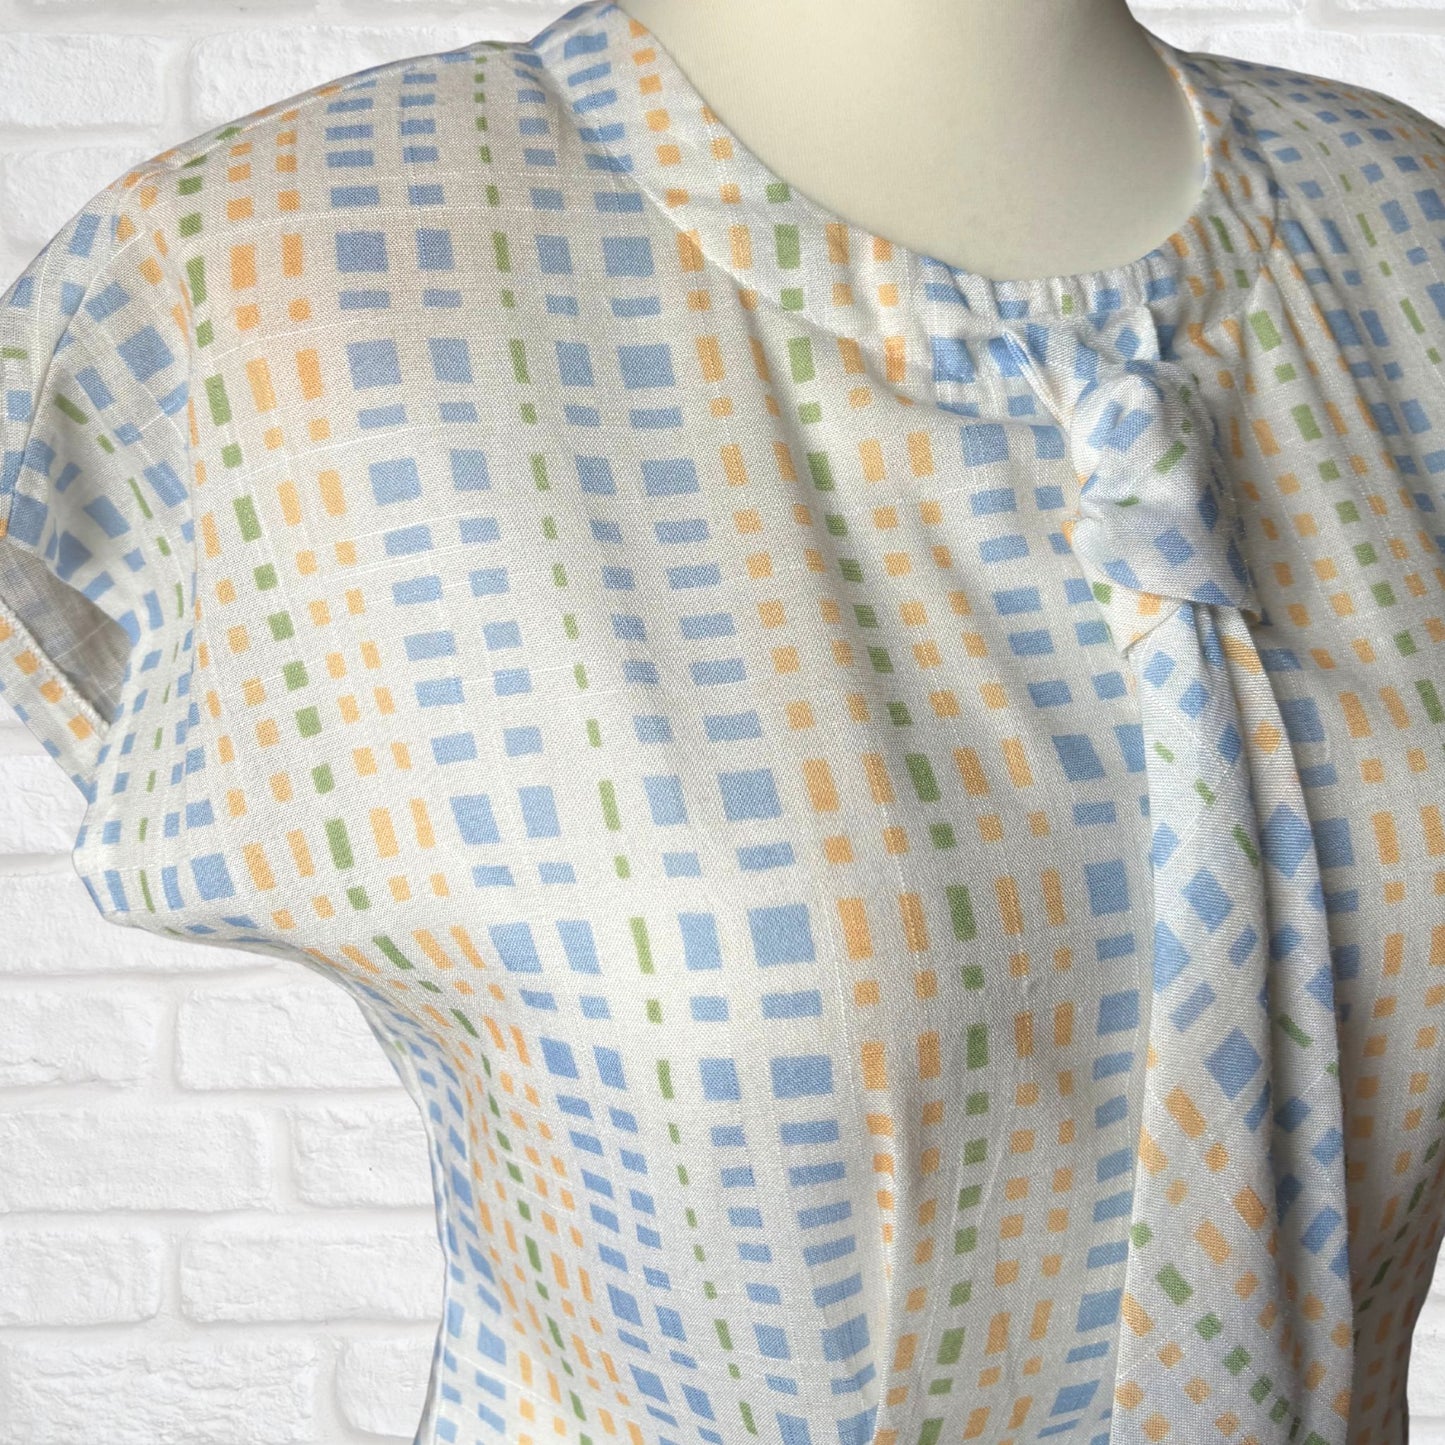 Vintage 50s Style Tie Front Geometric Print Blouse with Button Up Back. Approx UK size 12-14